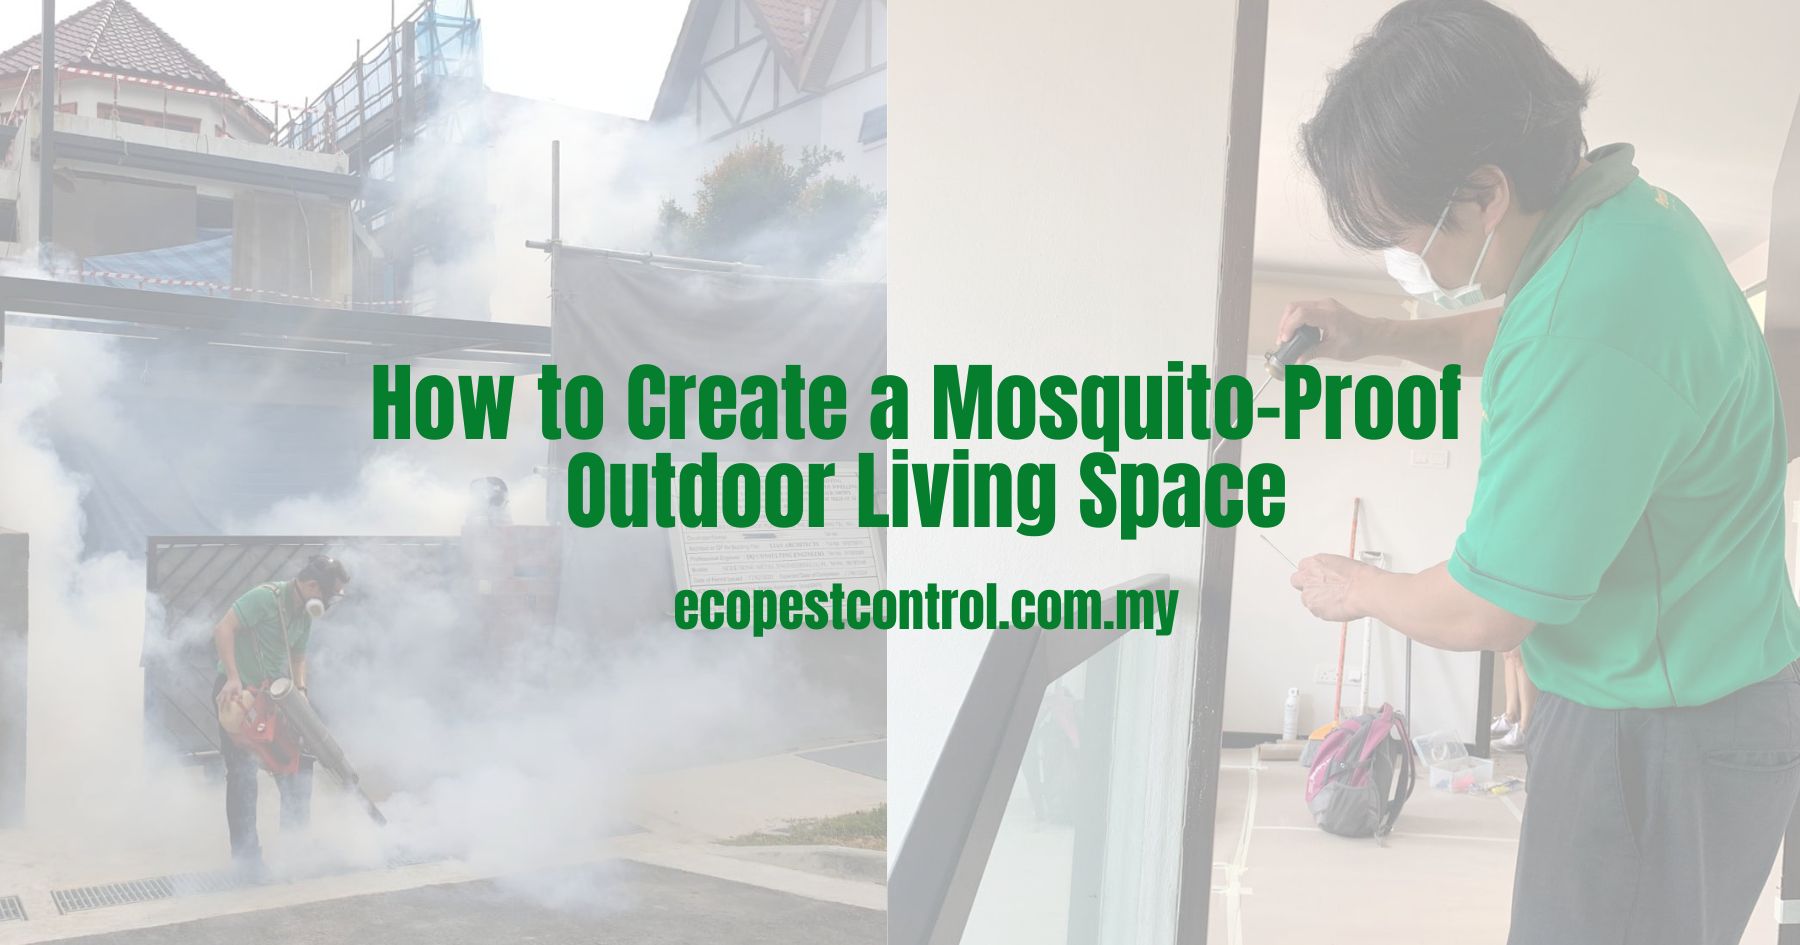 How to Create a Mosquito-Proof Outdoor Living Space